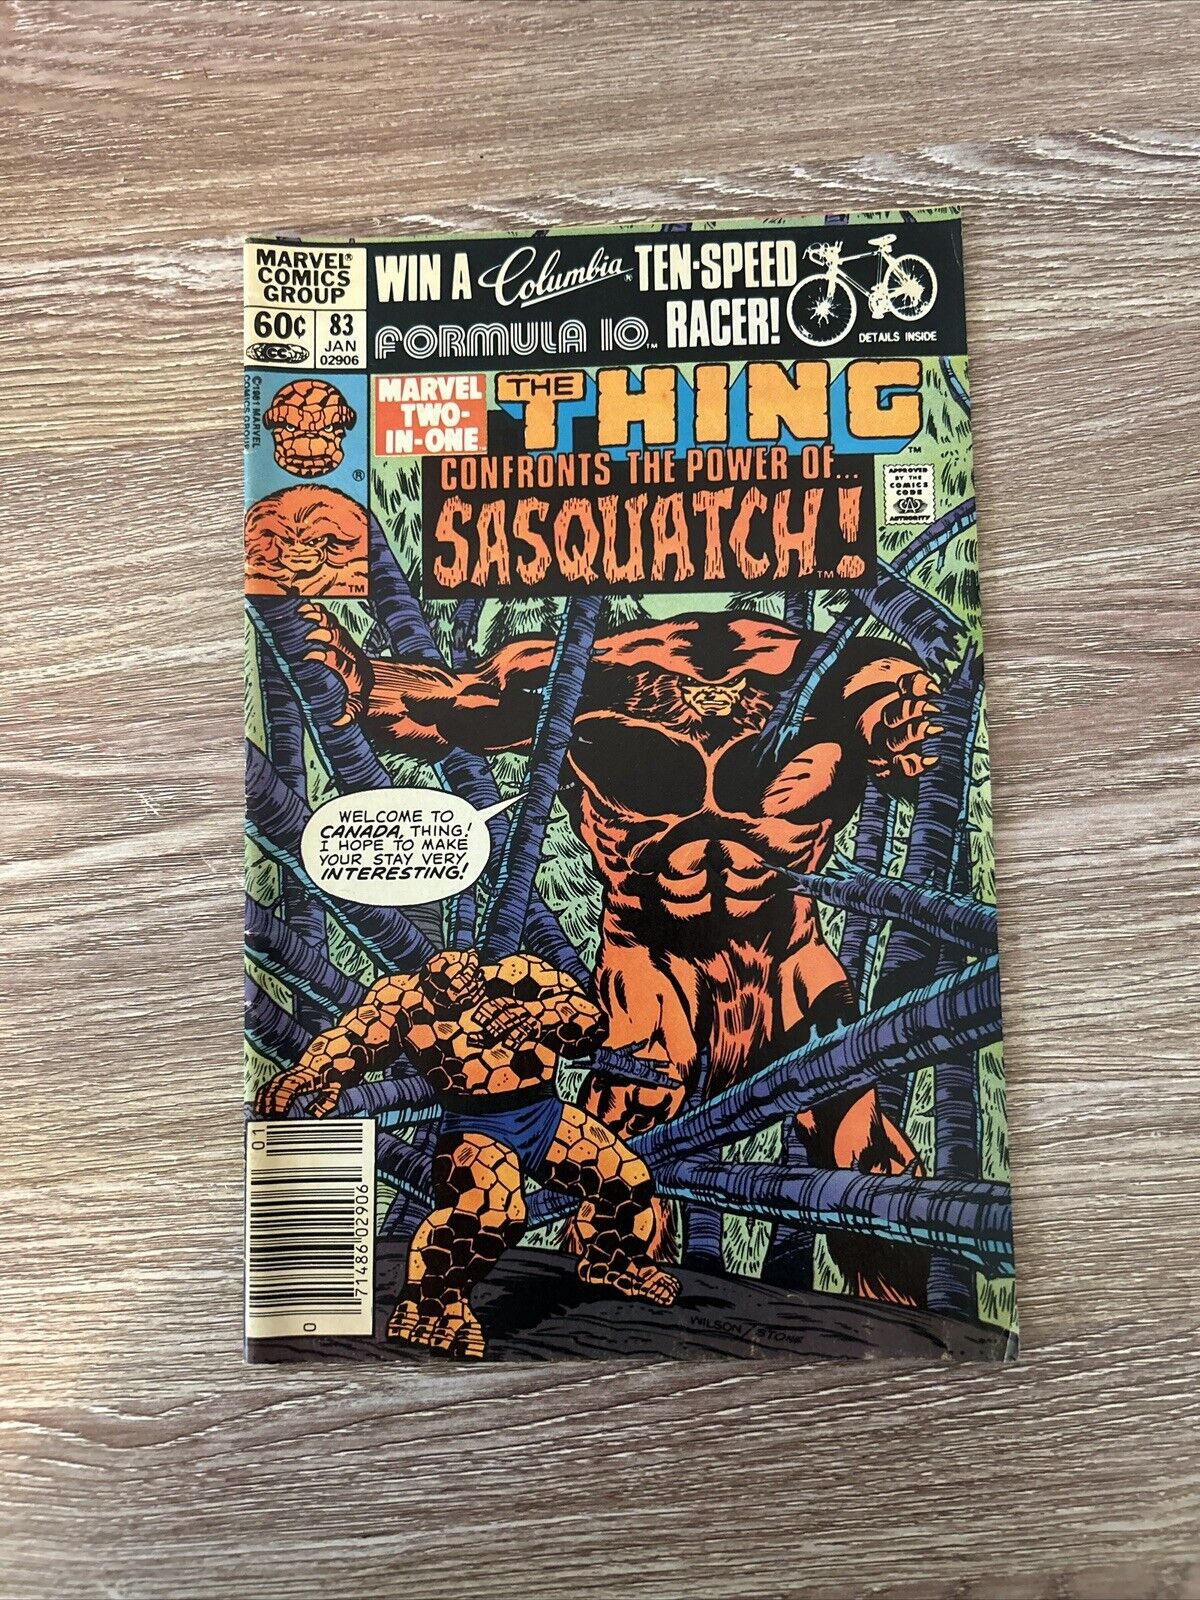 Marvel Two-in-One #83 Marvel 1981 The Thing confronts the Power of...Sasquatch 